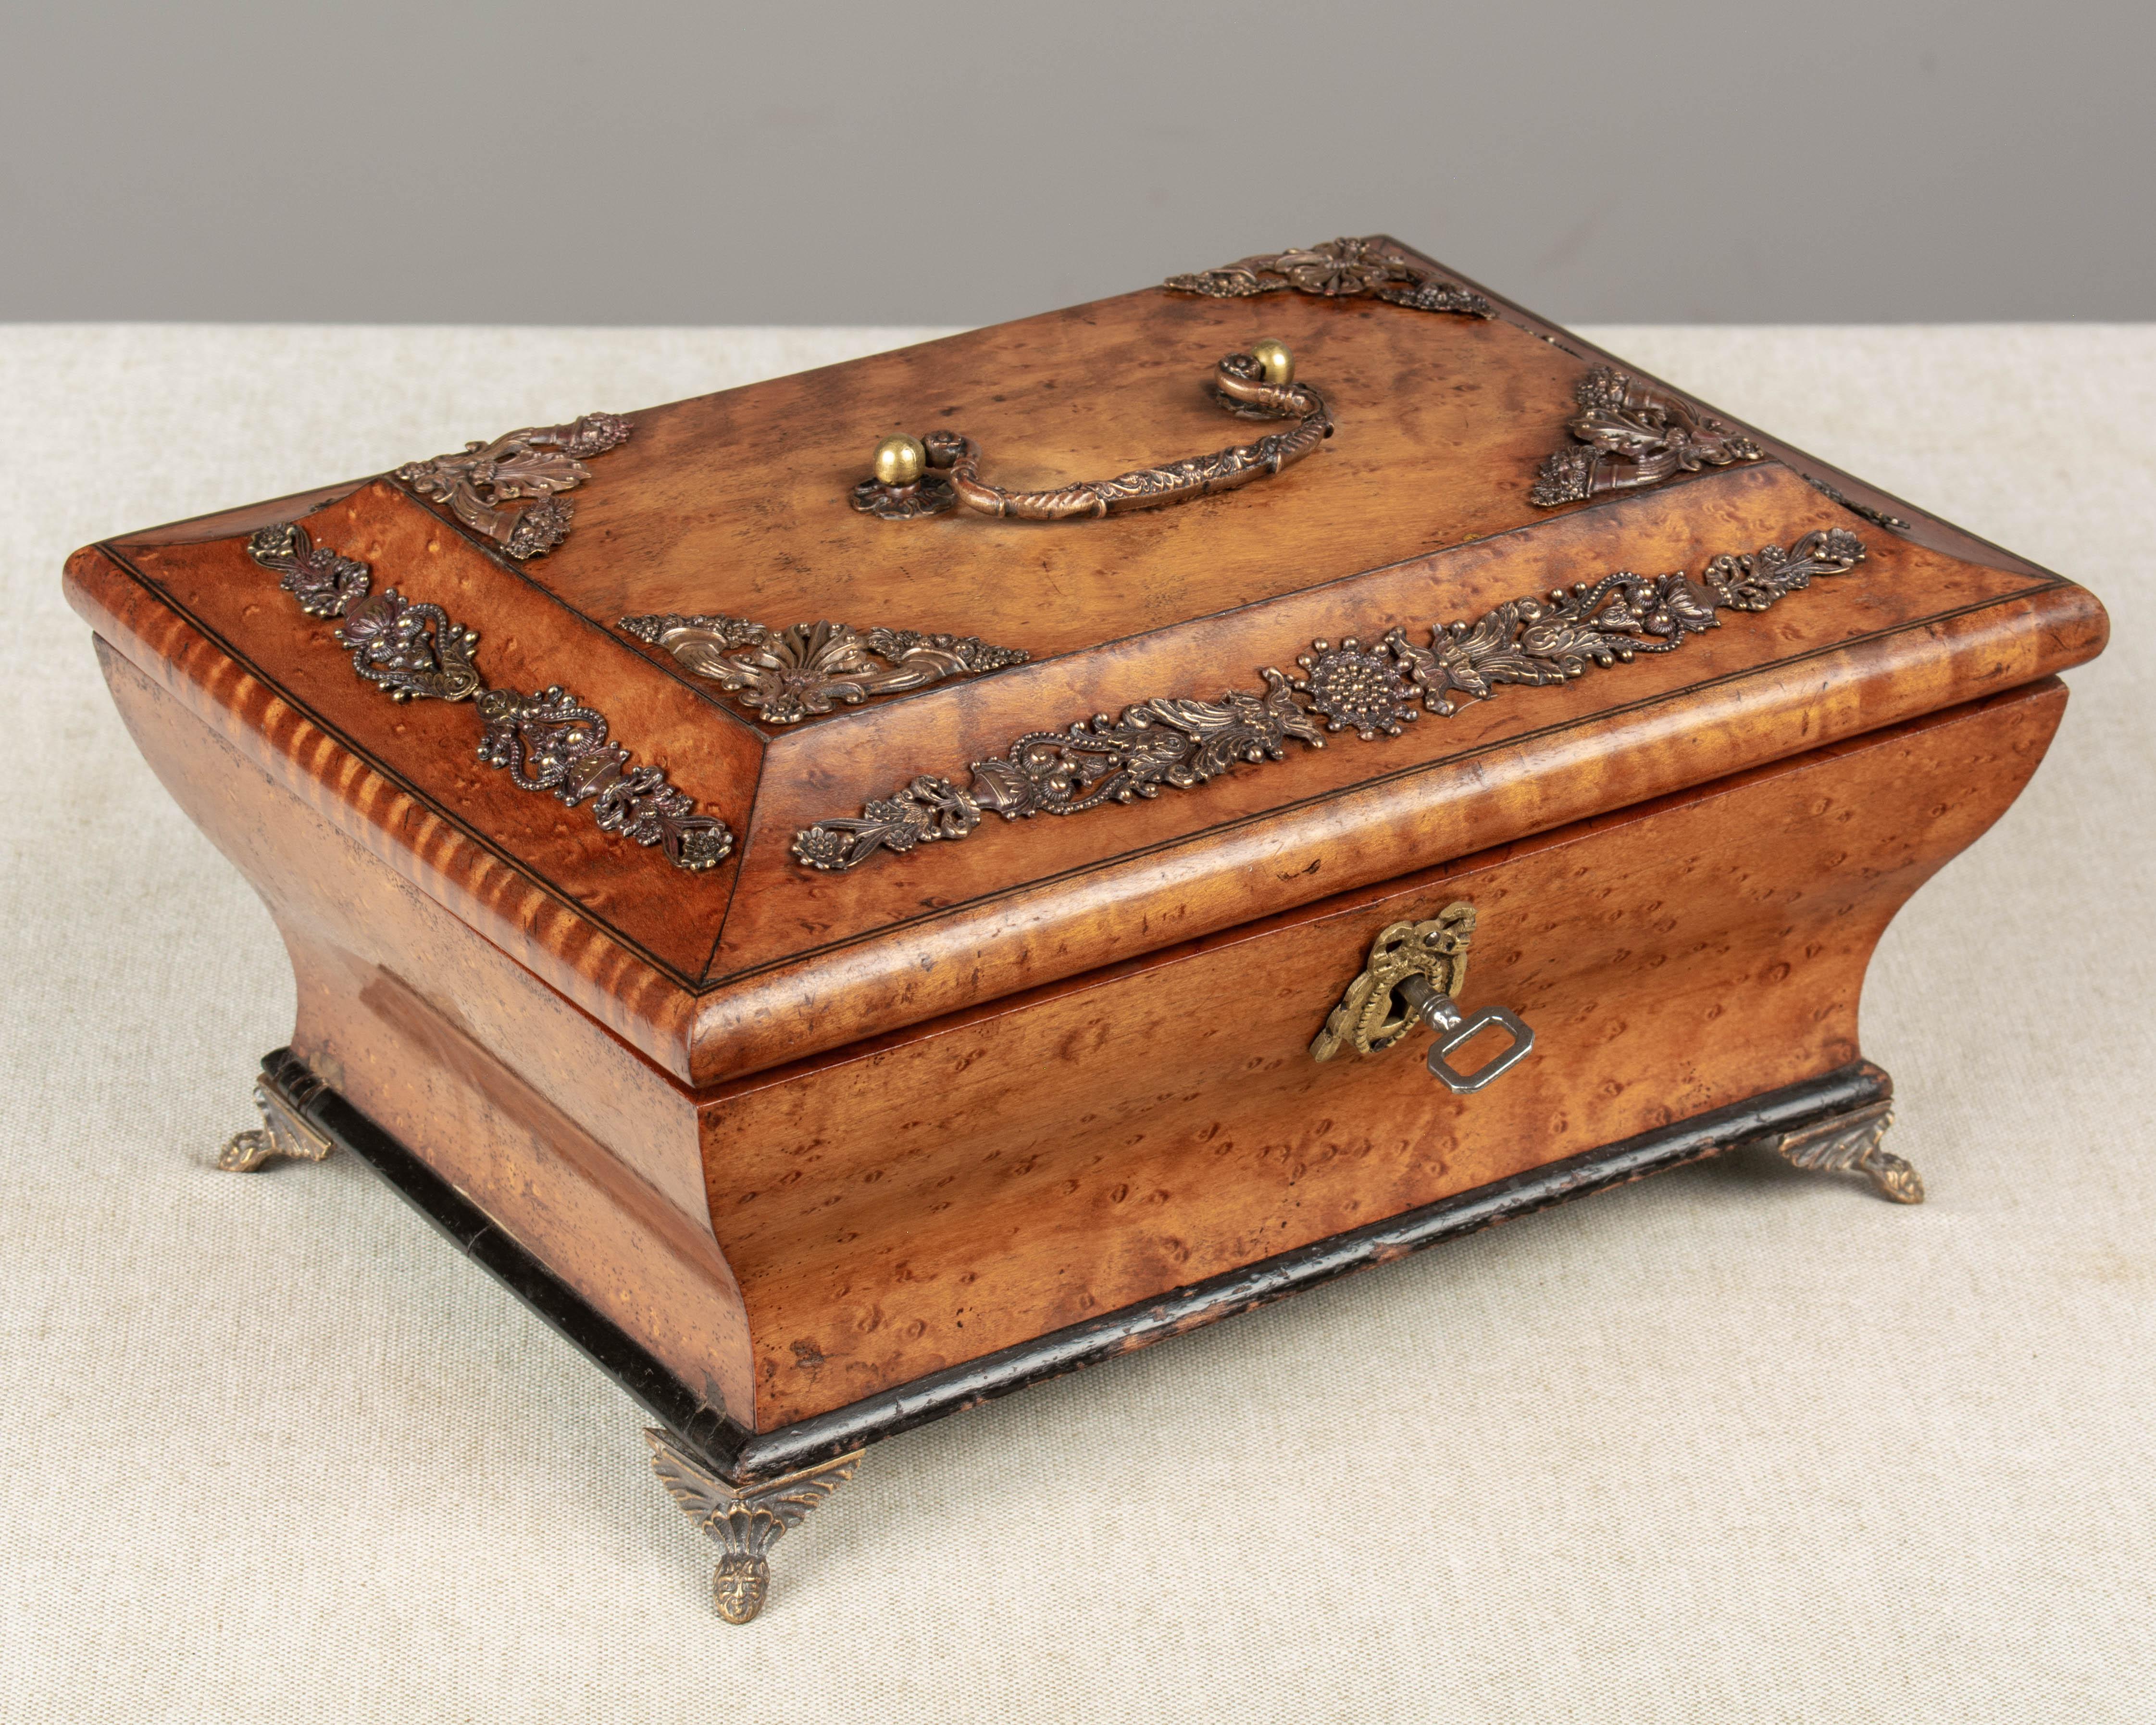 An early 20th century French Charles X style jewelry or sewing box made of amboyna wood veneer with cast brass decoration and handle. Interior is lined in blue moiré fabric with mirror inside the lid. Raised on small brass feet. Black painted trim